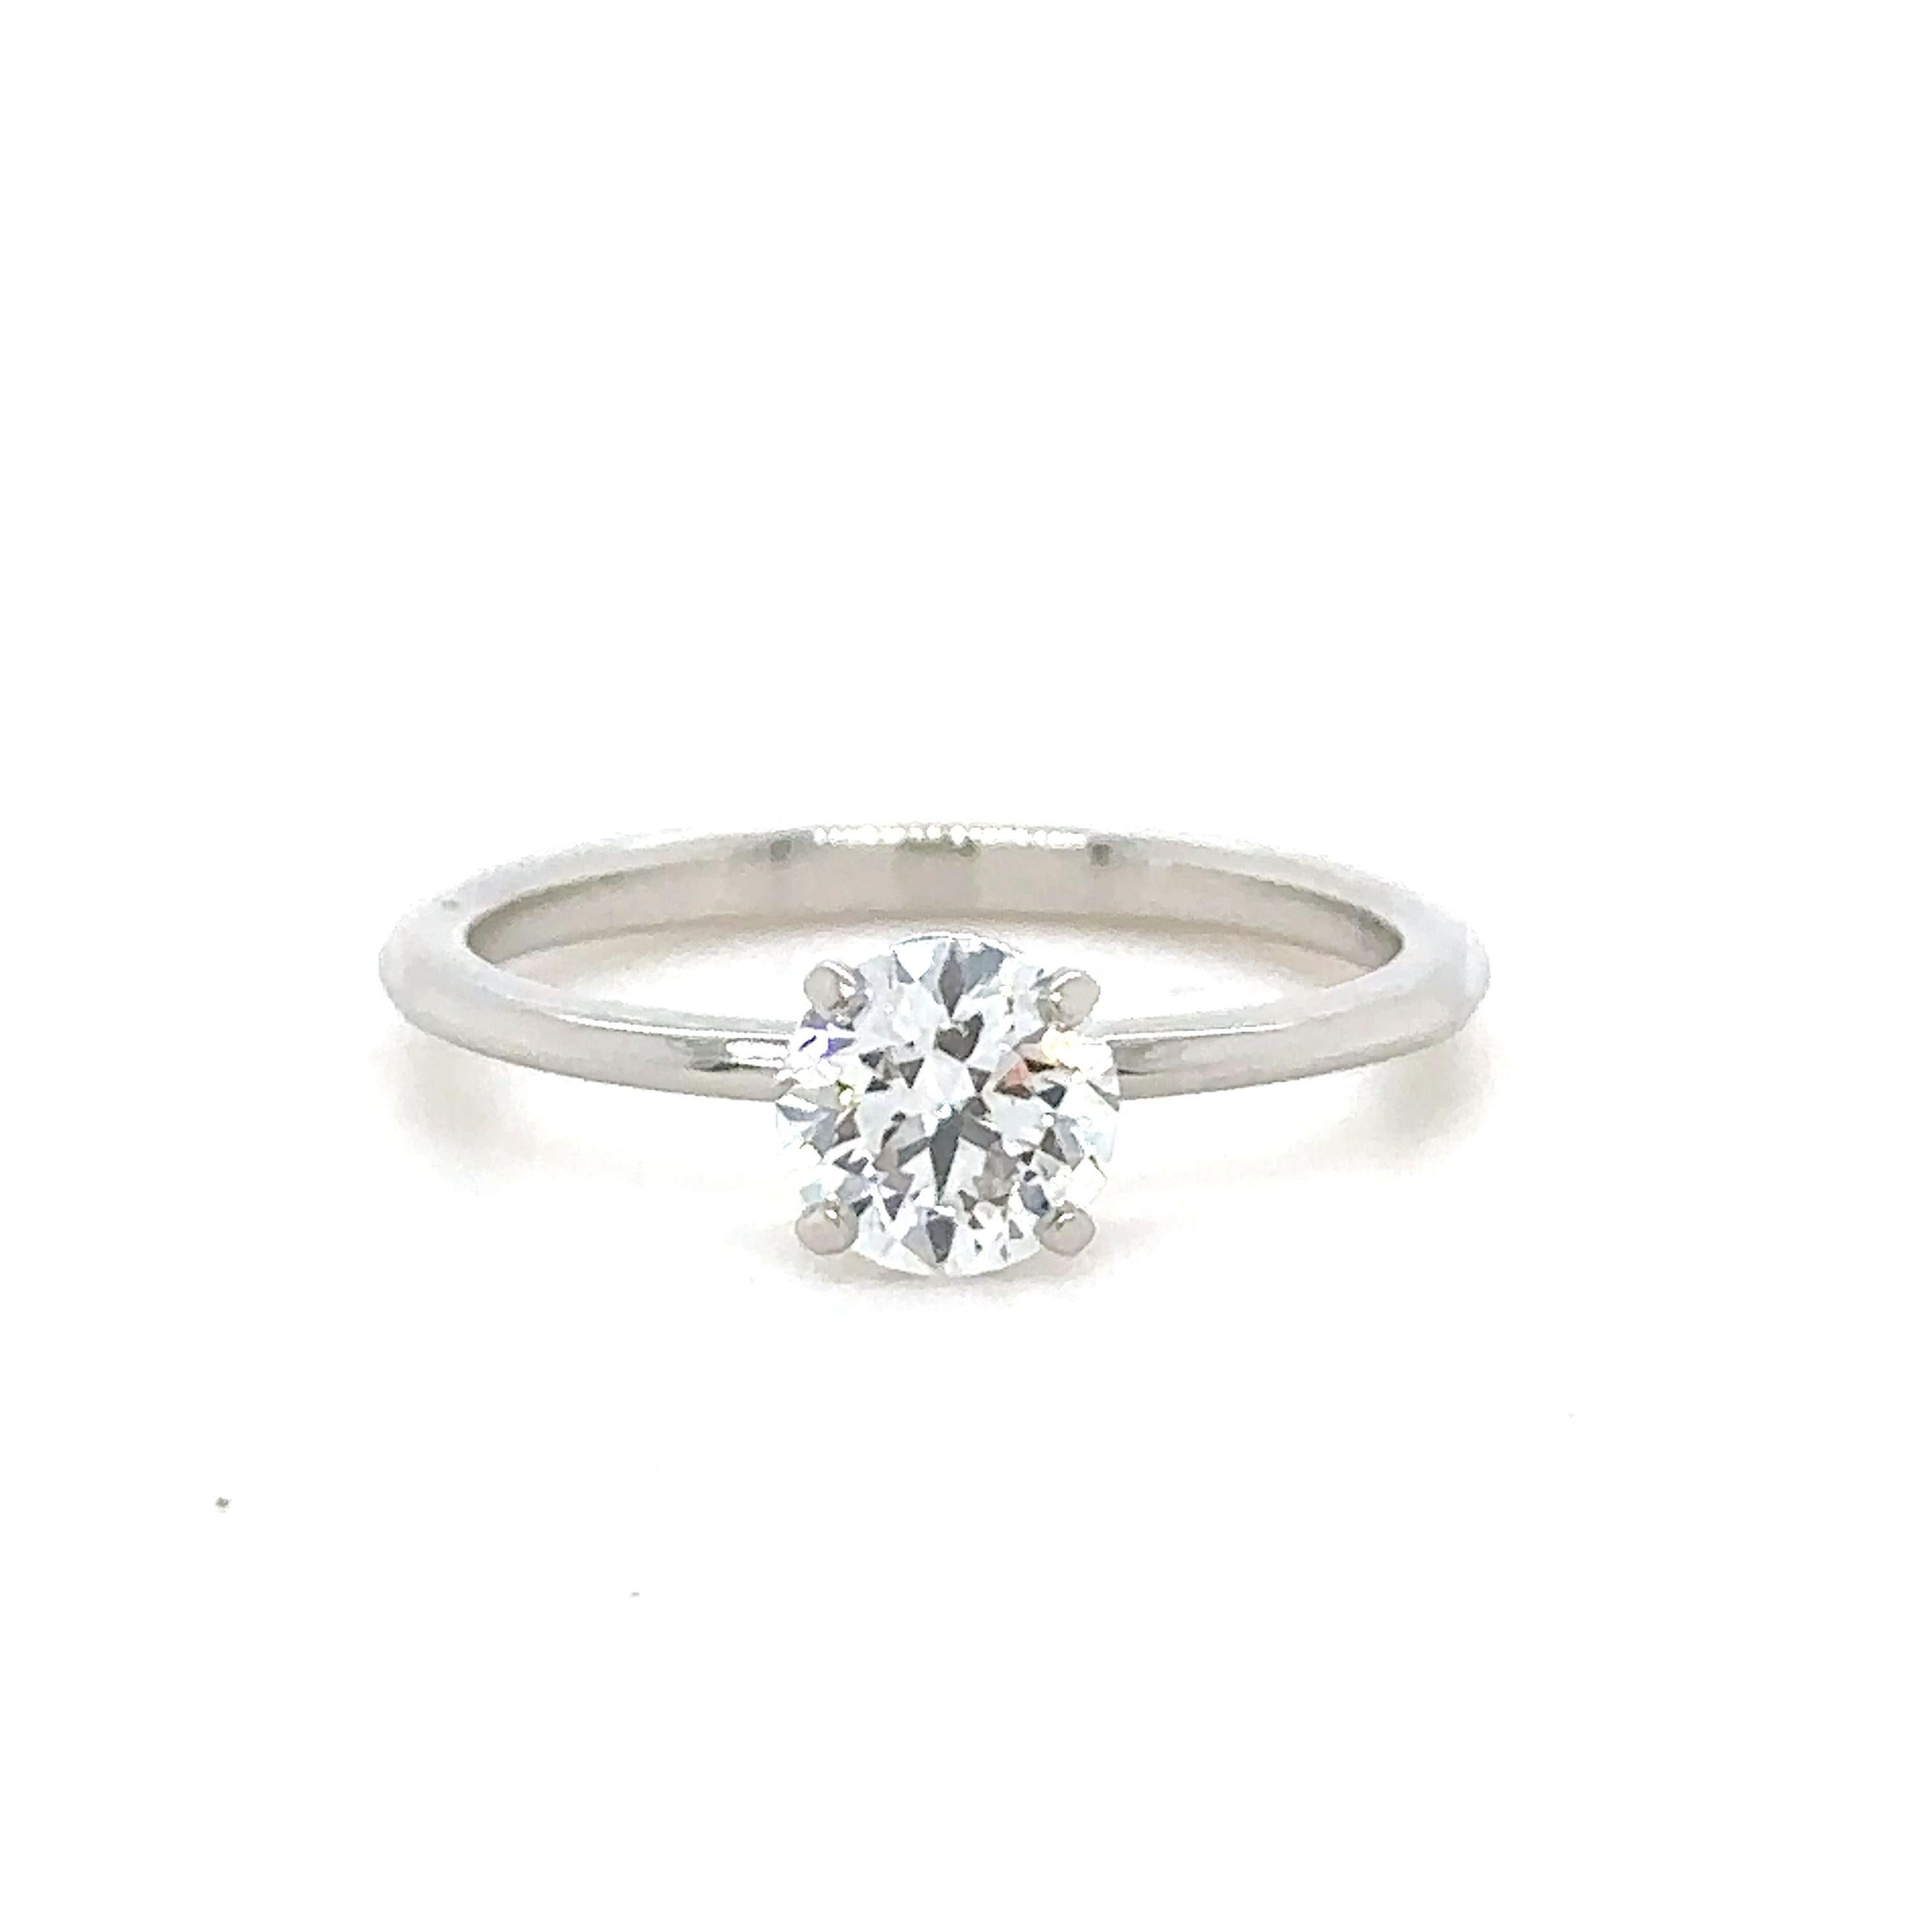 A Tiffany & Co True Solitaire Diamond Ring, made of Platinum. Prong set with one round brilliant cut diamond, E colour, VS2 clarity with a total carat weight of 0.60ct. 

Metal: Platinum PT950
Carat: 0.60ct
Colour: E
Clarity: VS2
Cut: Brilliant